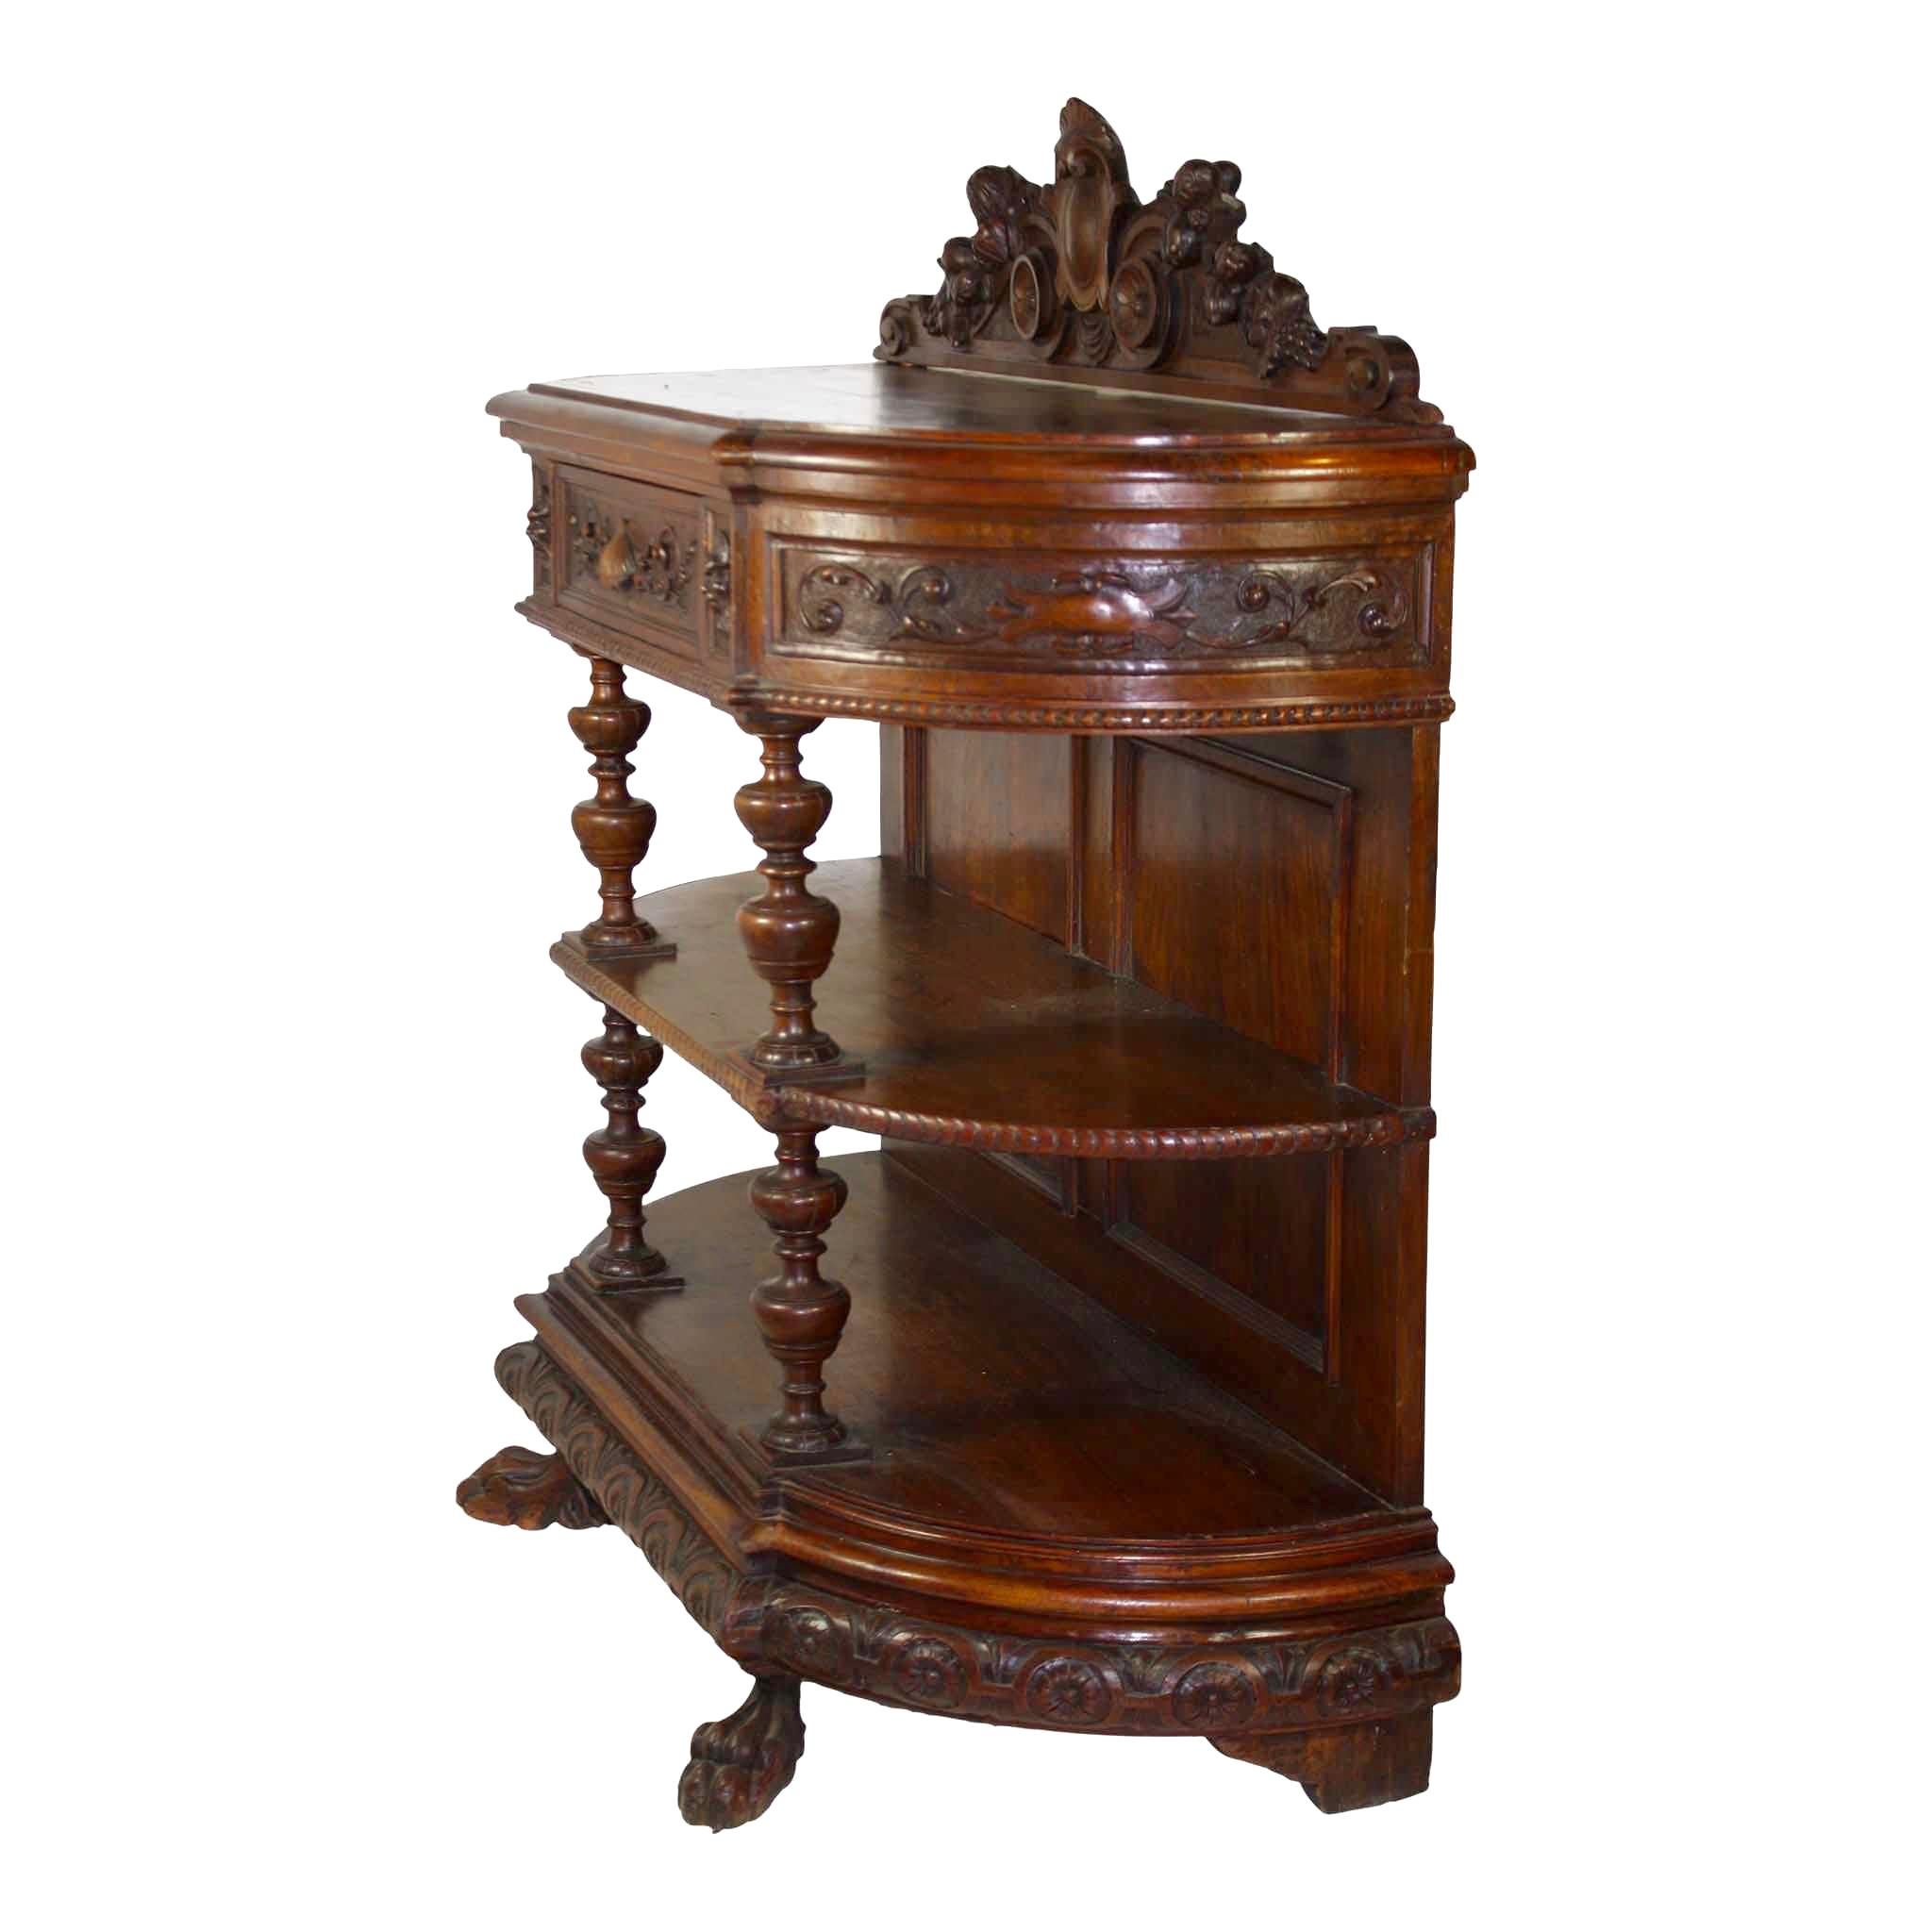 Comprised of solid oak and oak veneer, this beautiful hunt server features graceful lines apparent in the rounded curves of its three tiers, turned risers, and scrolled carvings. The scalloped backboard showcases carved fruit amid foliage with a